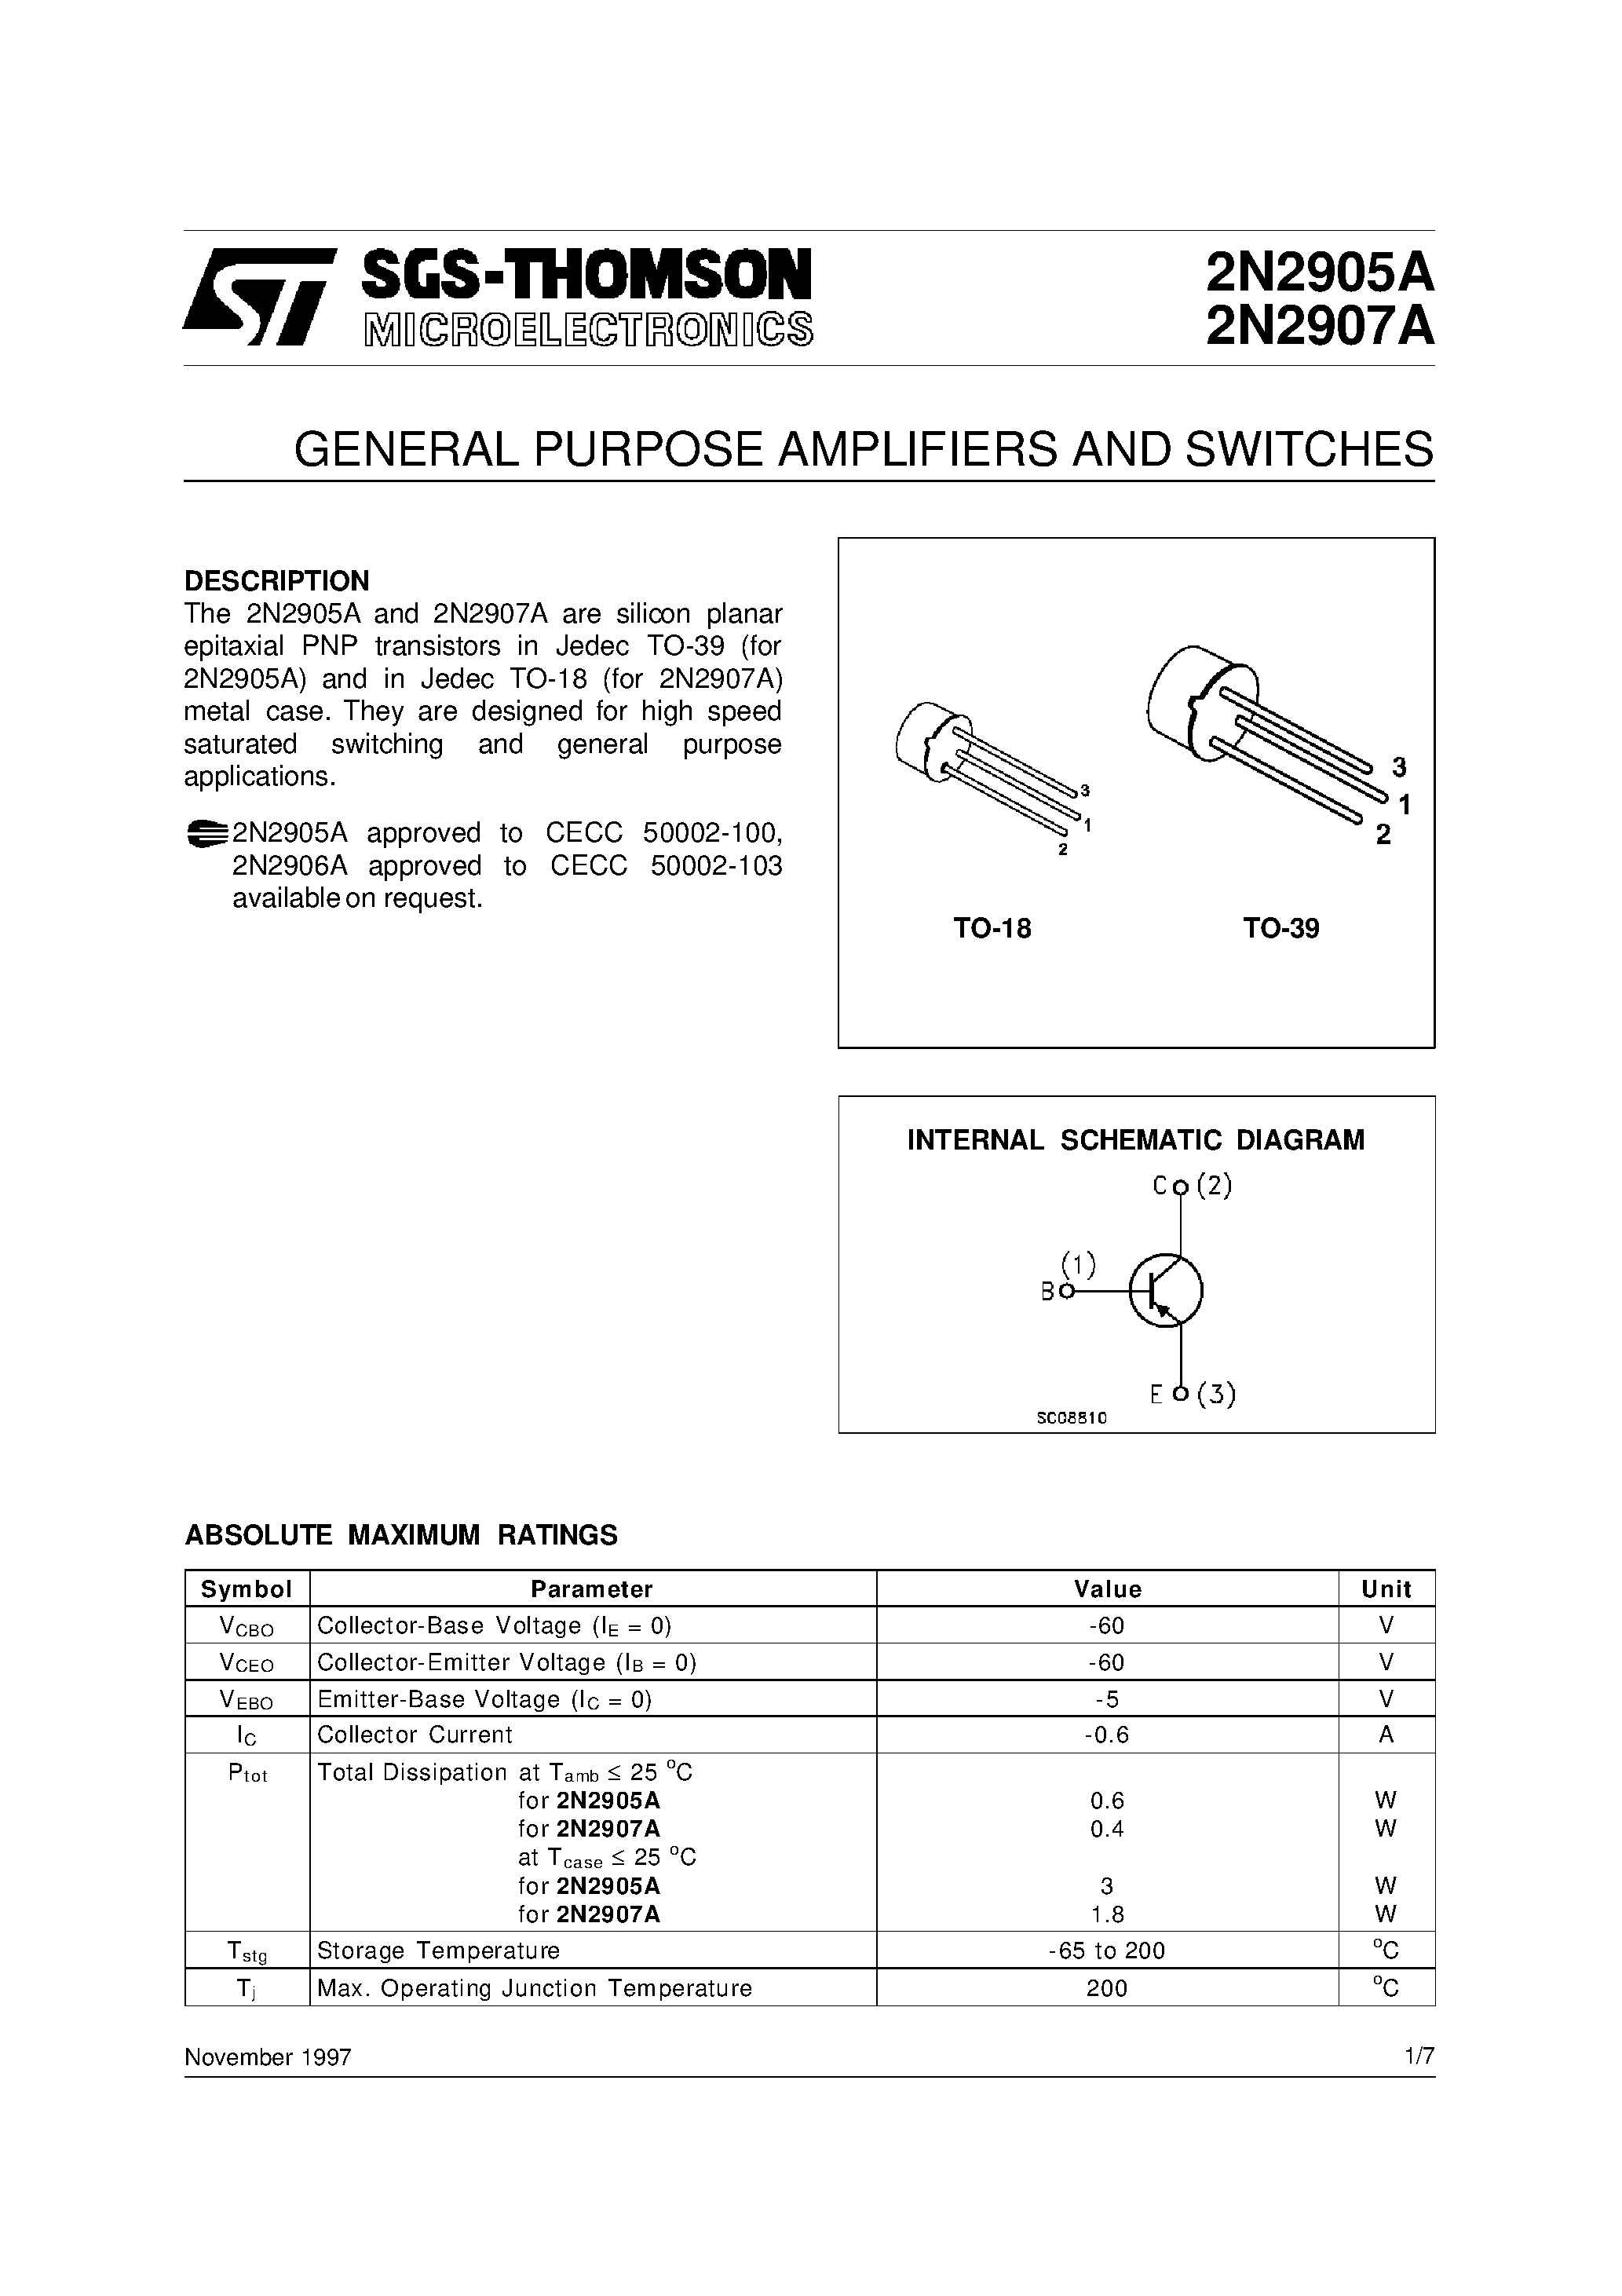 Datasheet 2N2907A - GENERAL PURPOSE AMPLIFIERS AND SWITCHES page 1